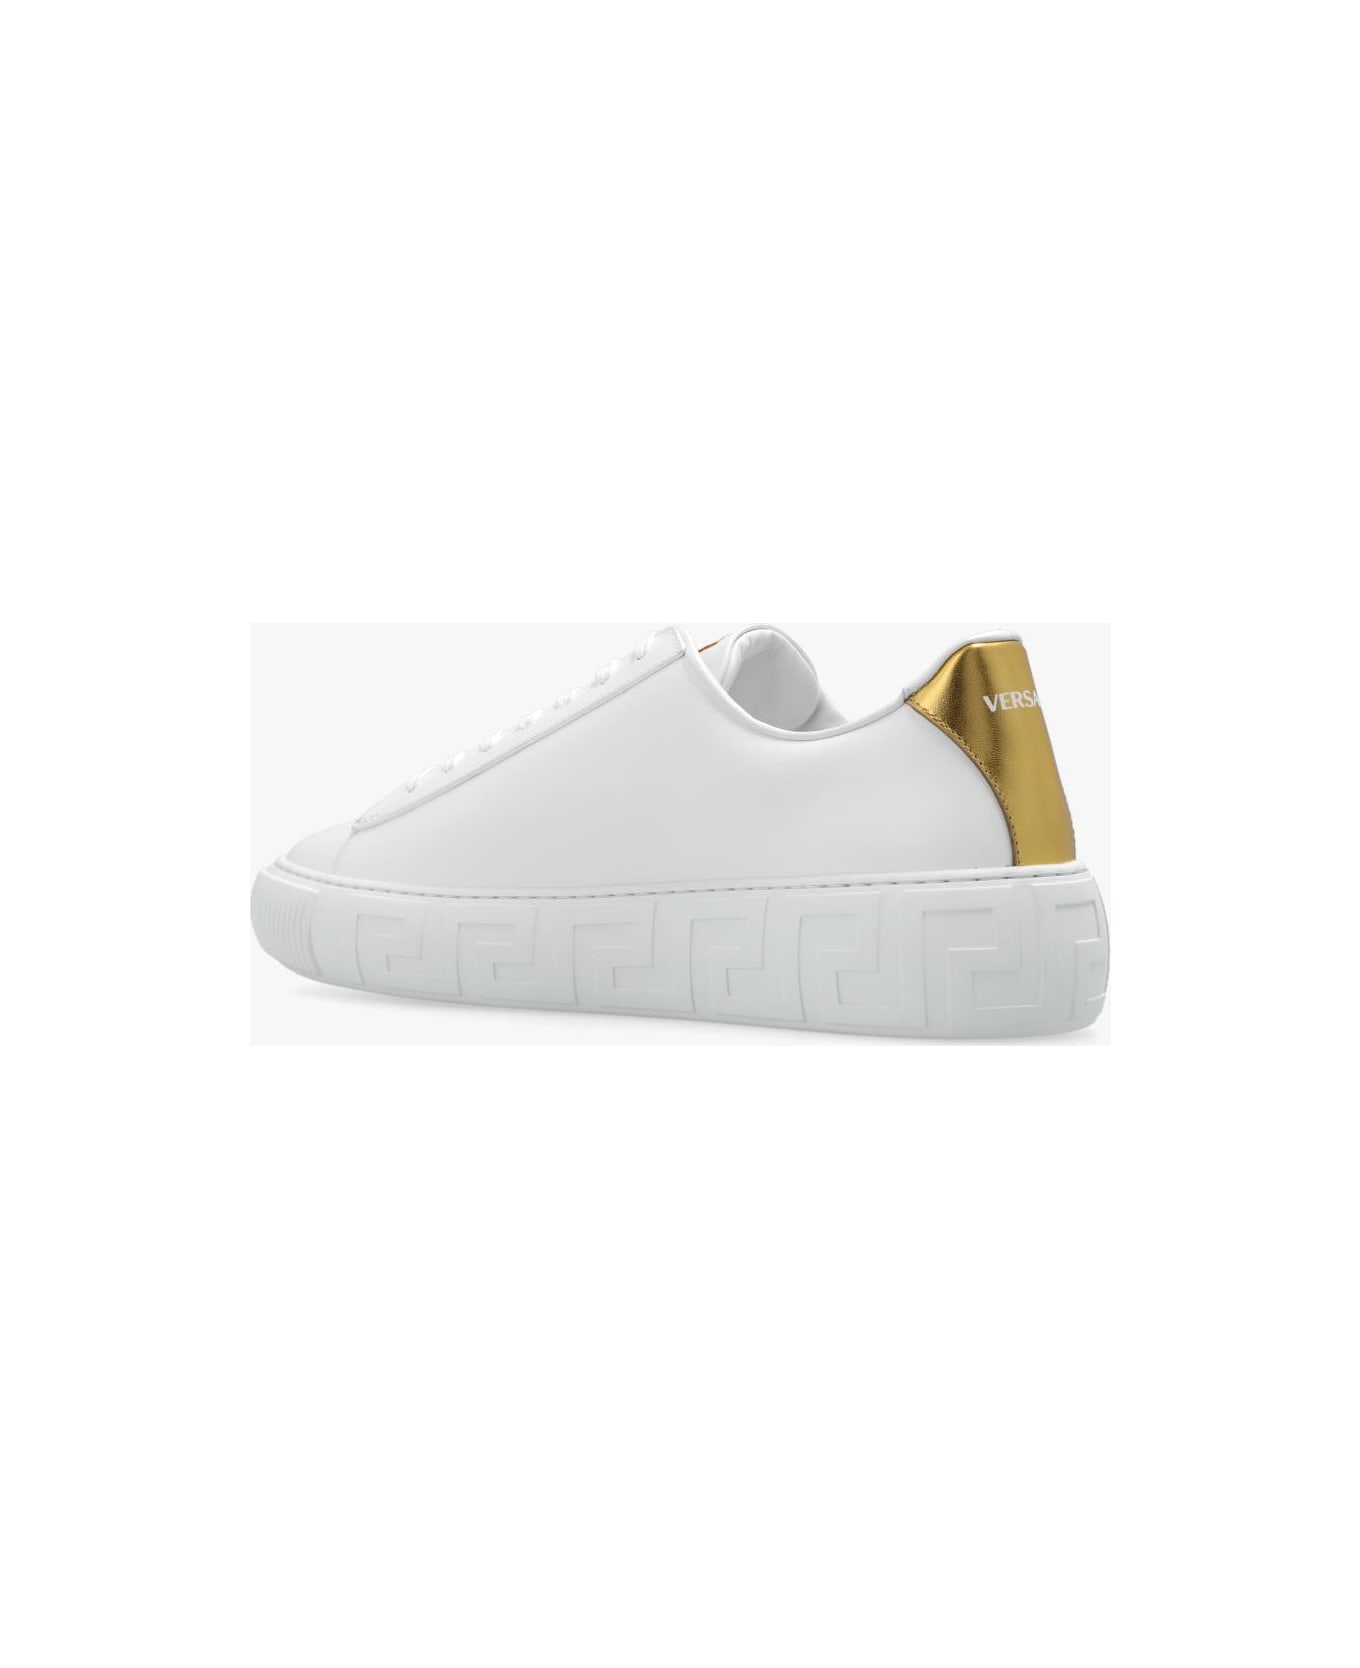 Versace Sneakers With Logo - White gold